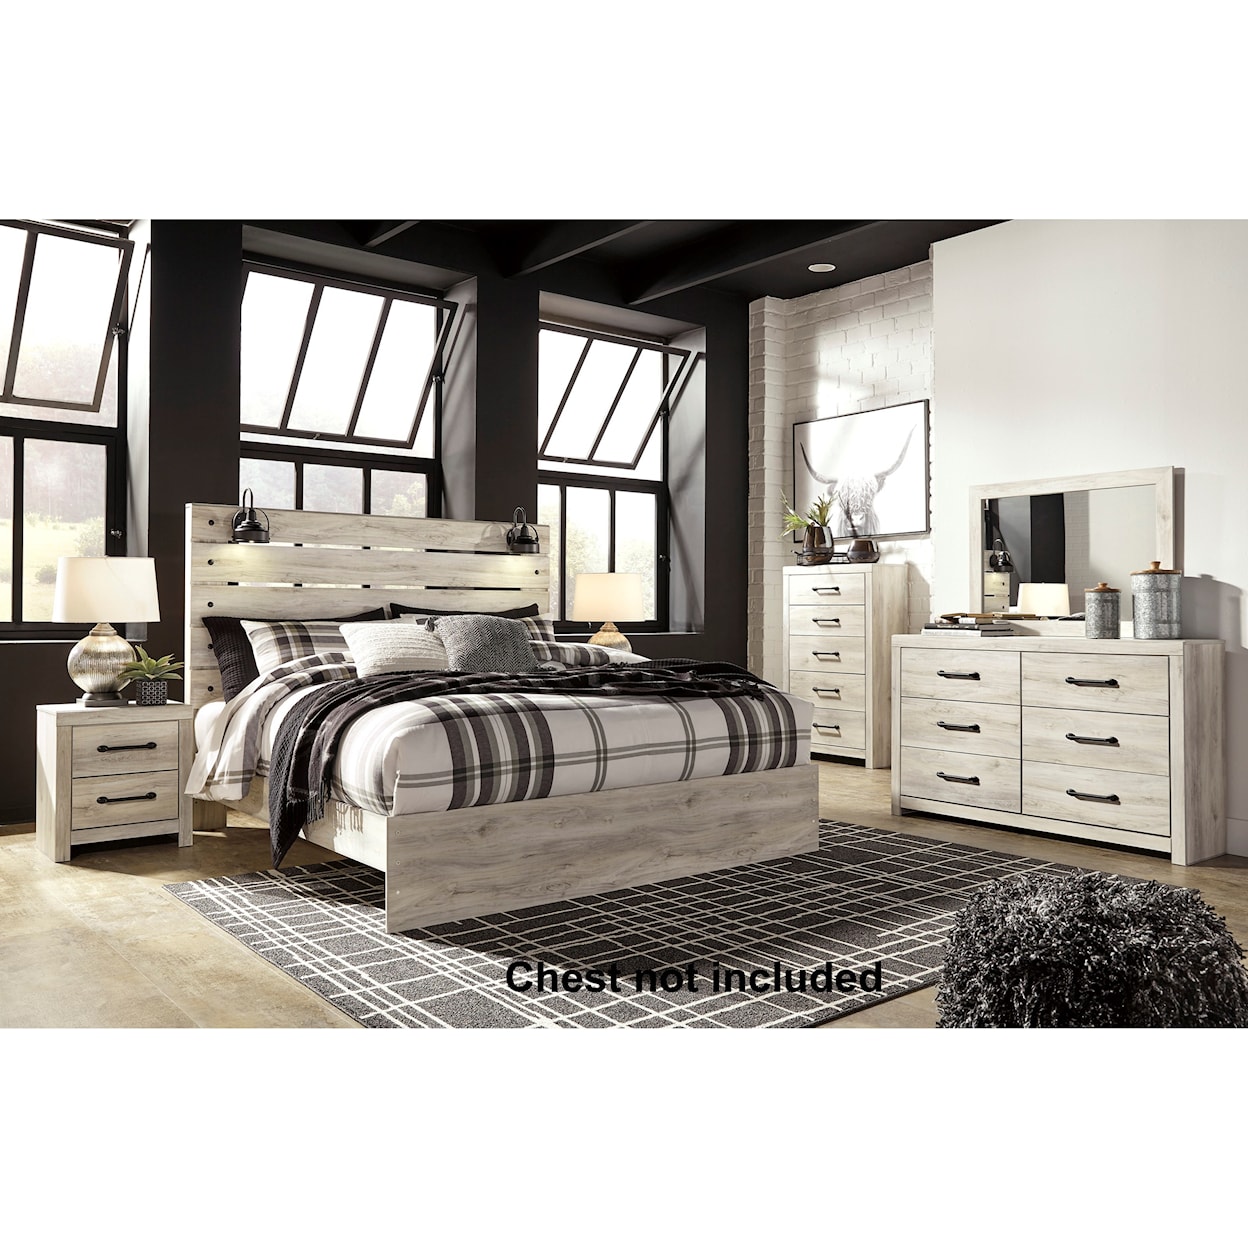 Signature Design by Ashley Cambeck King Bedroom Group